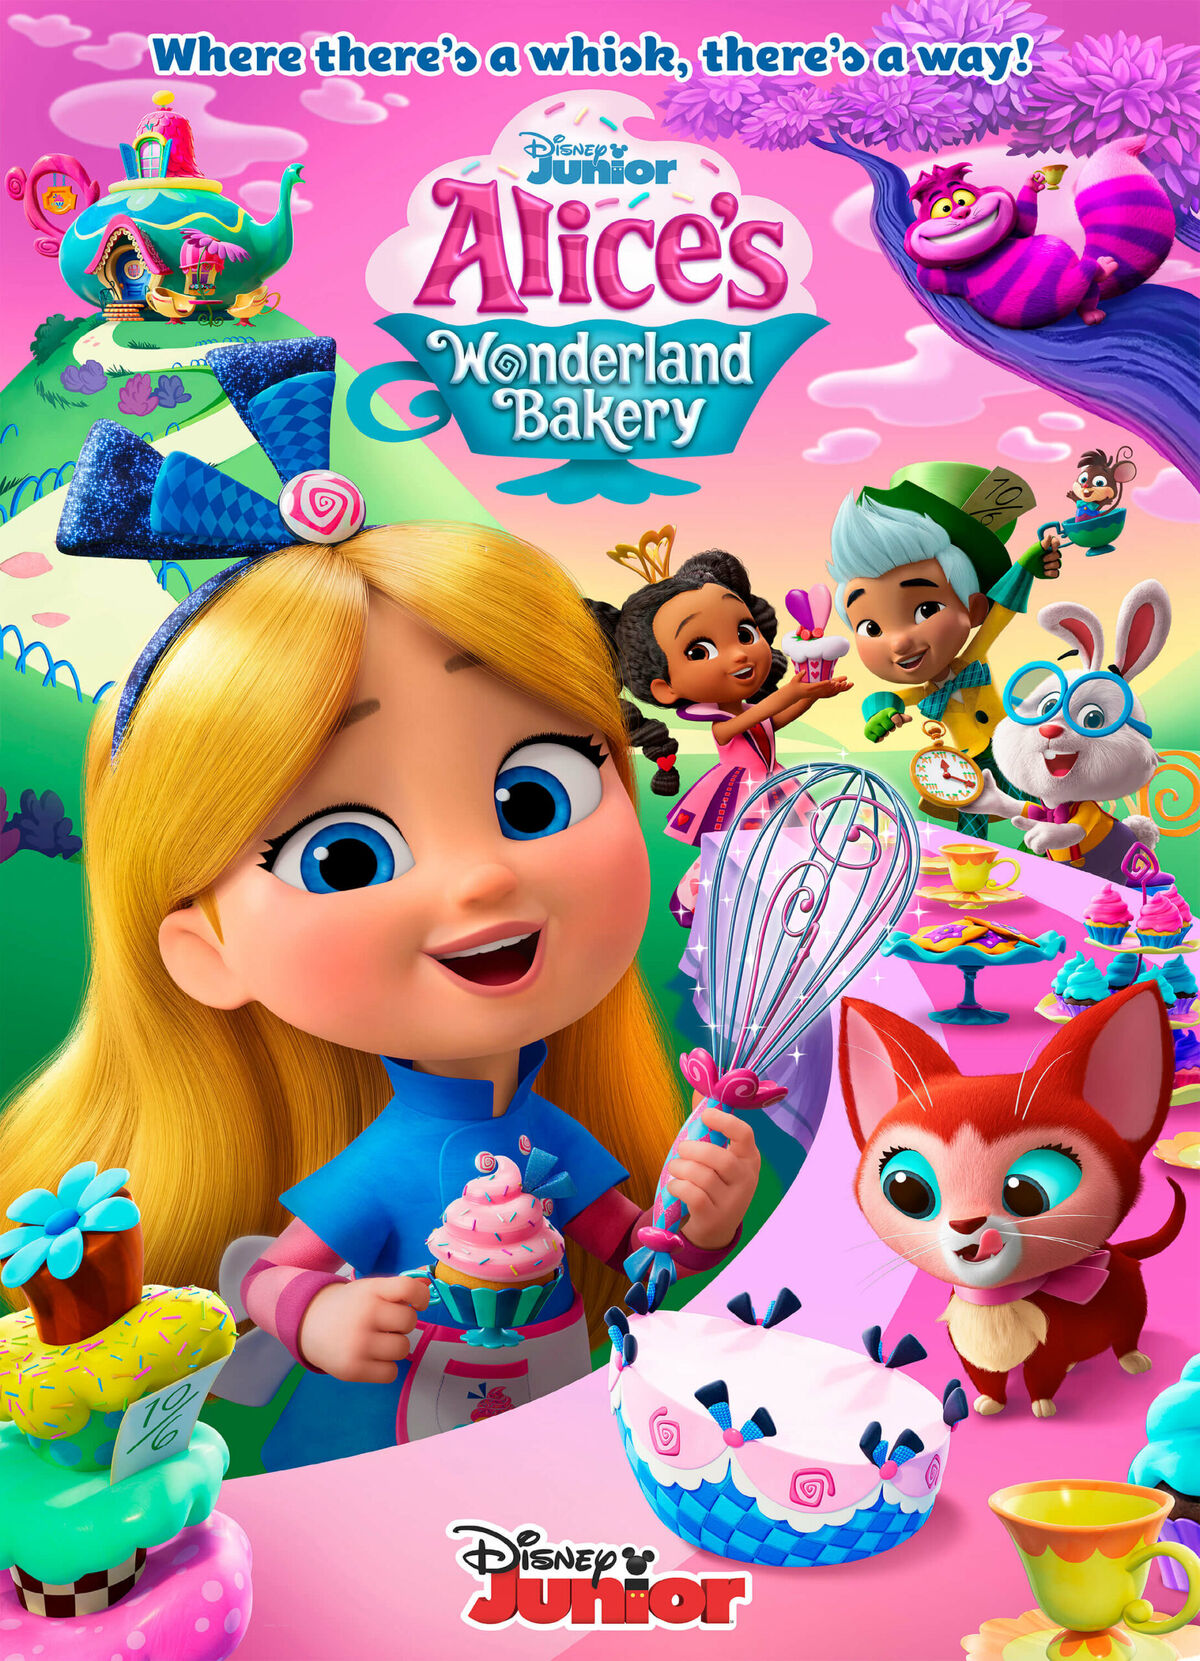 https://static.wikia.nocookie.net/soundeffects/images/d/dd/Alice%27s_Wonderland_Bakery_poster.jpg/revision/latest/scale-to-width-down/1200?cb=20220109232828